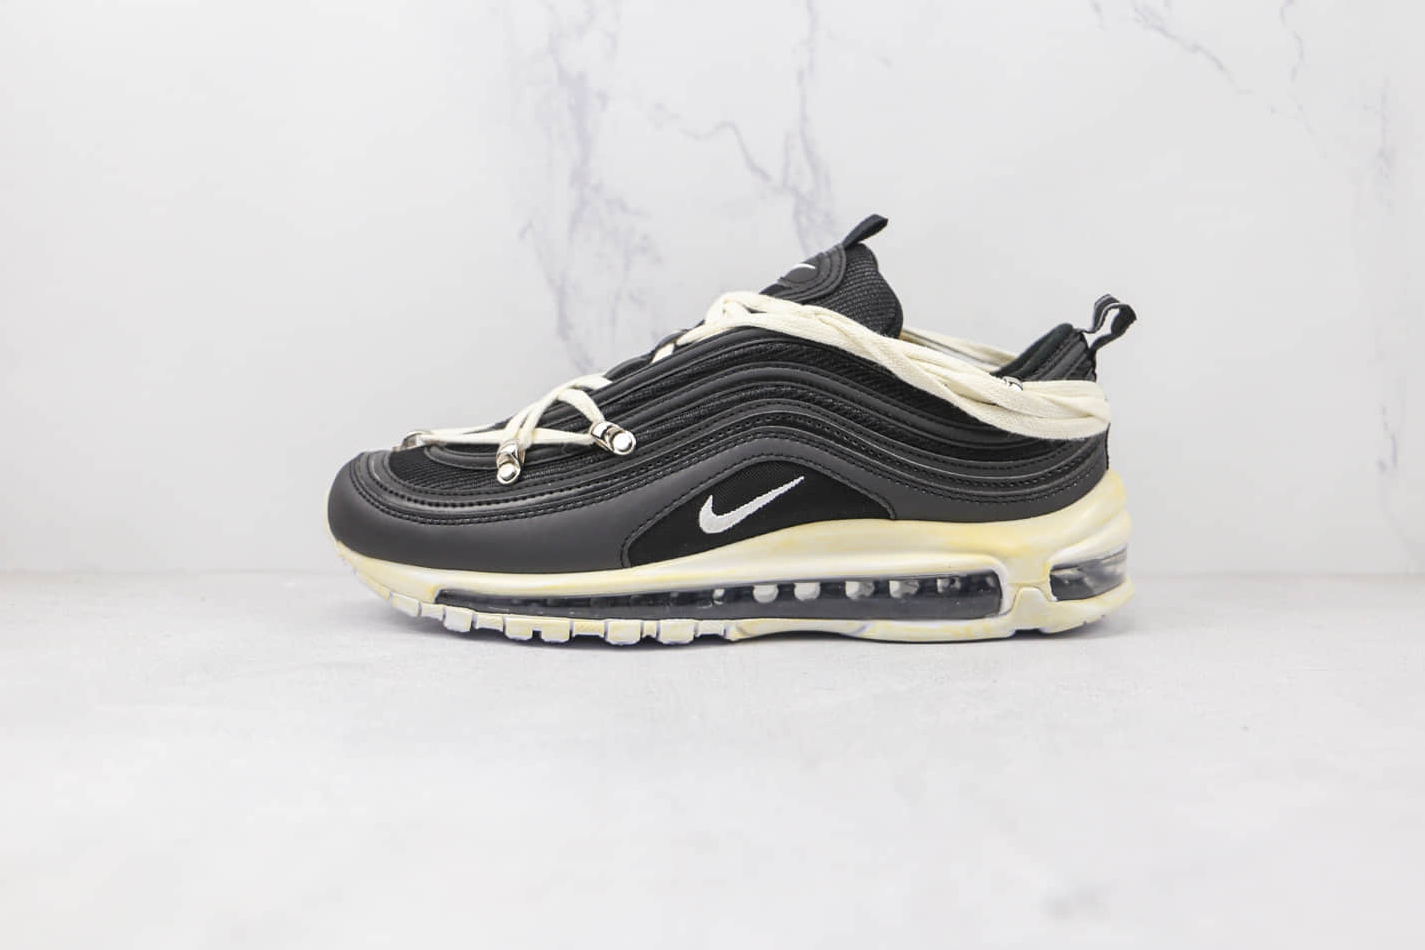 Nike Air Max 97 'Black' 921826-001 - Trendy and Stylish Sneakers at Competitive Prices